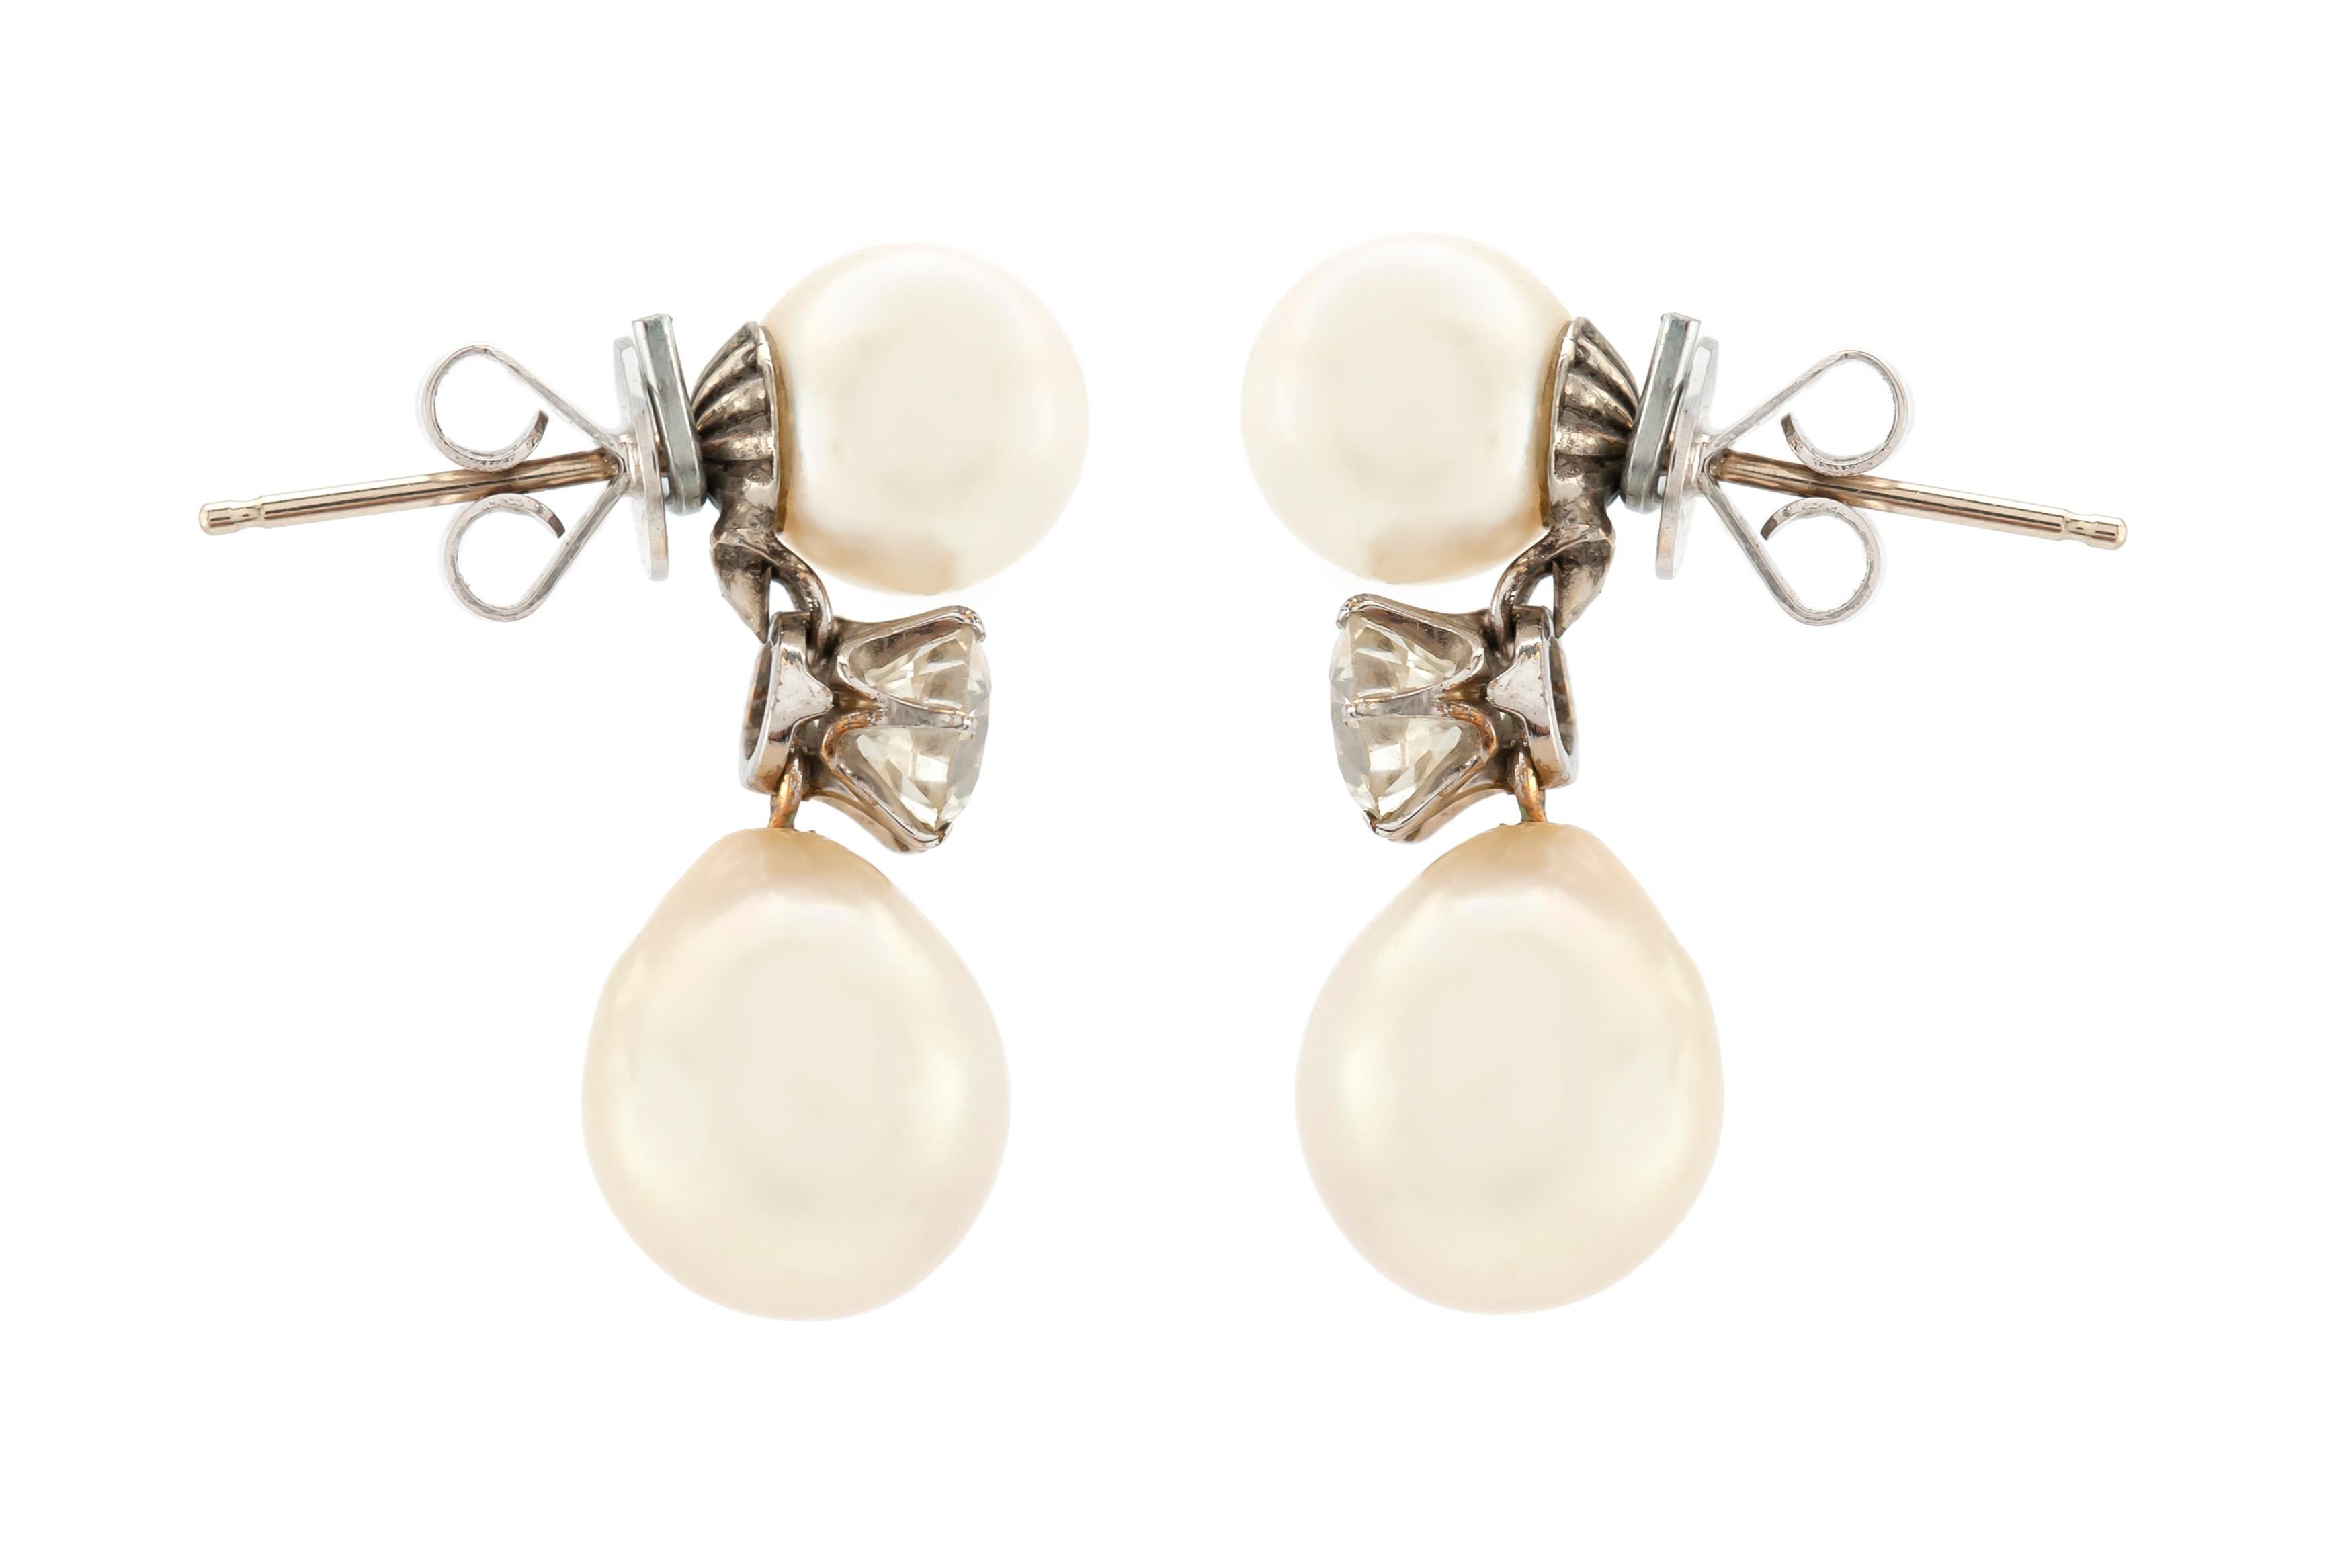 The earrings are finely crafted in 14k white gold with four beautiful pearls and diamonds weighing approximately total of 1.30 carat.